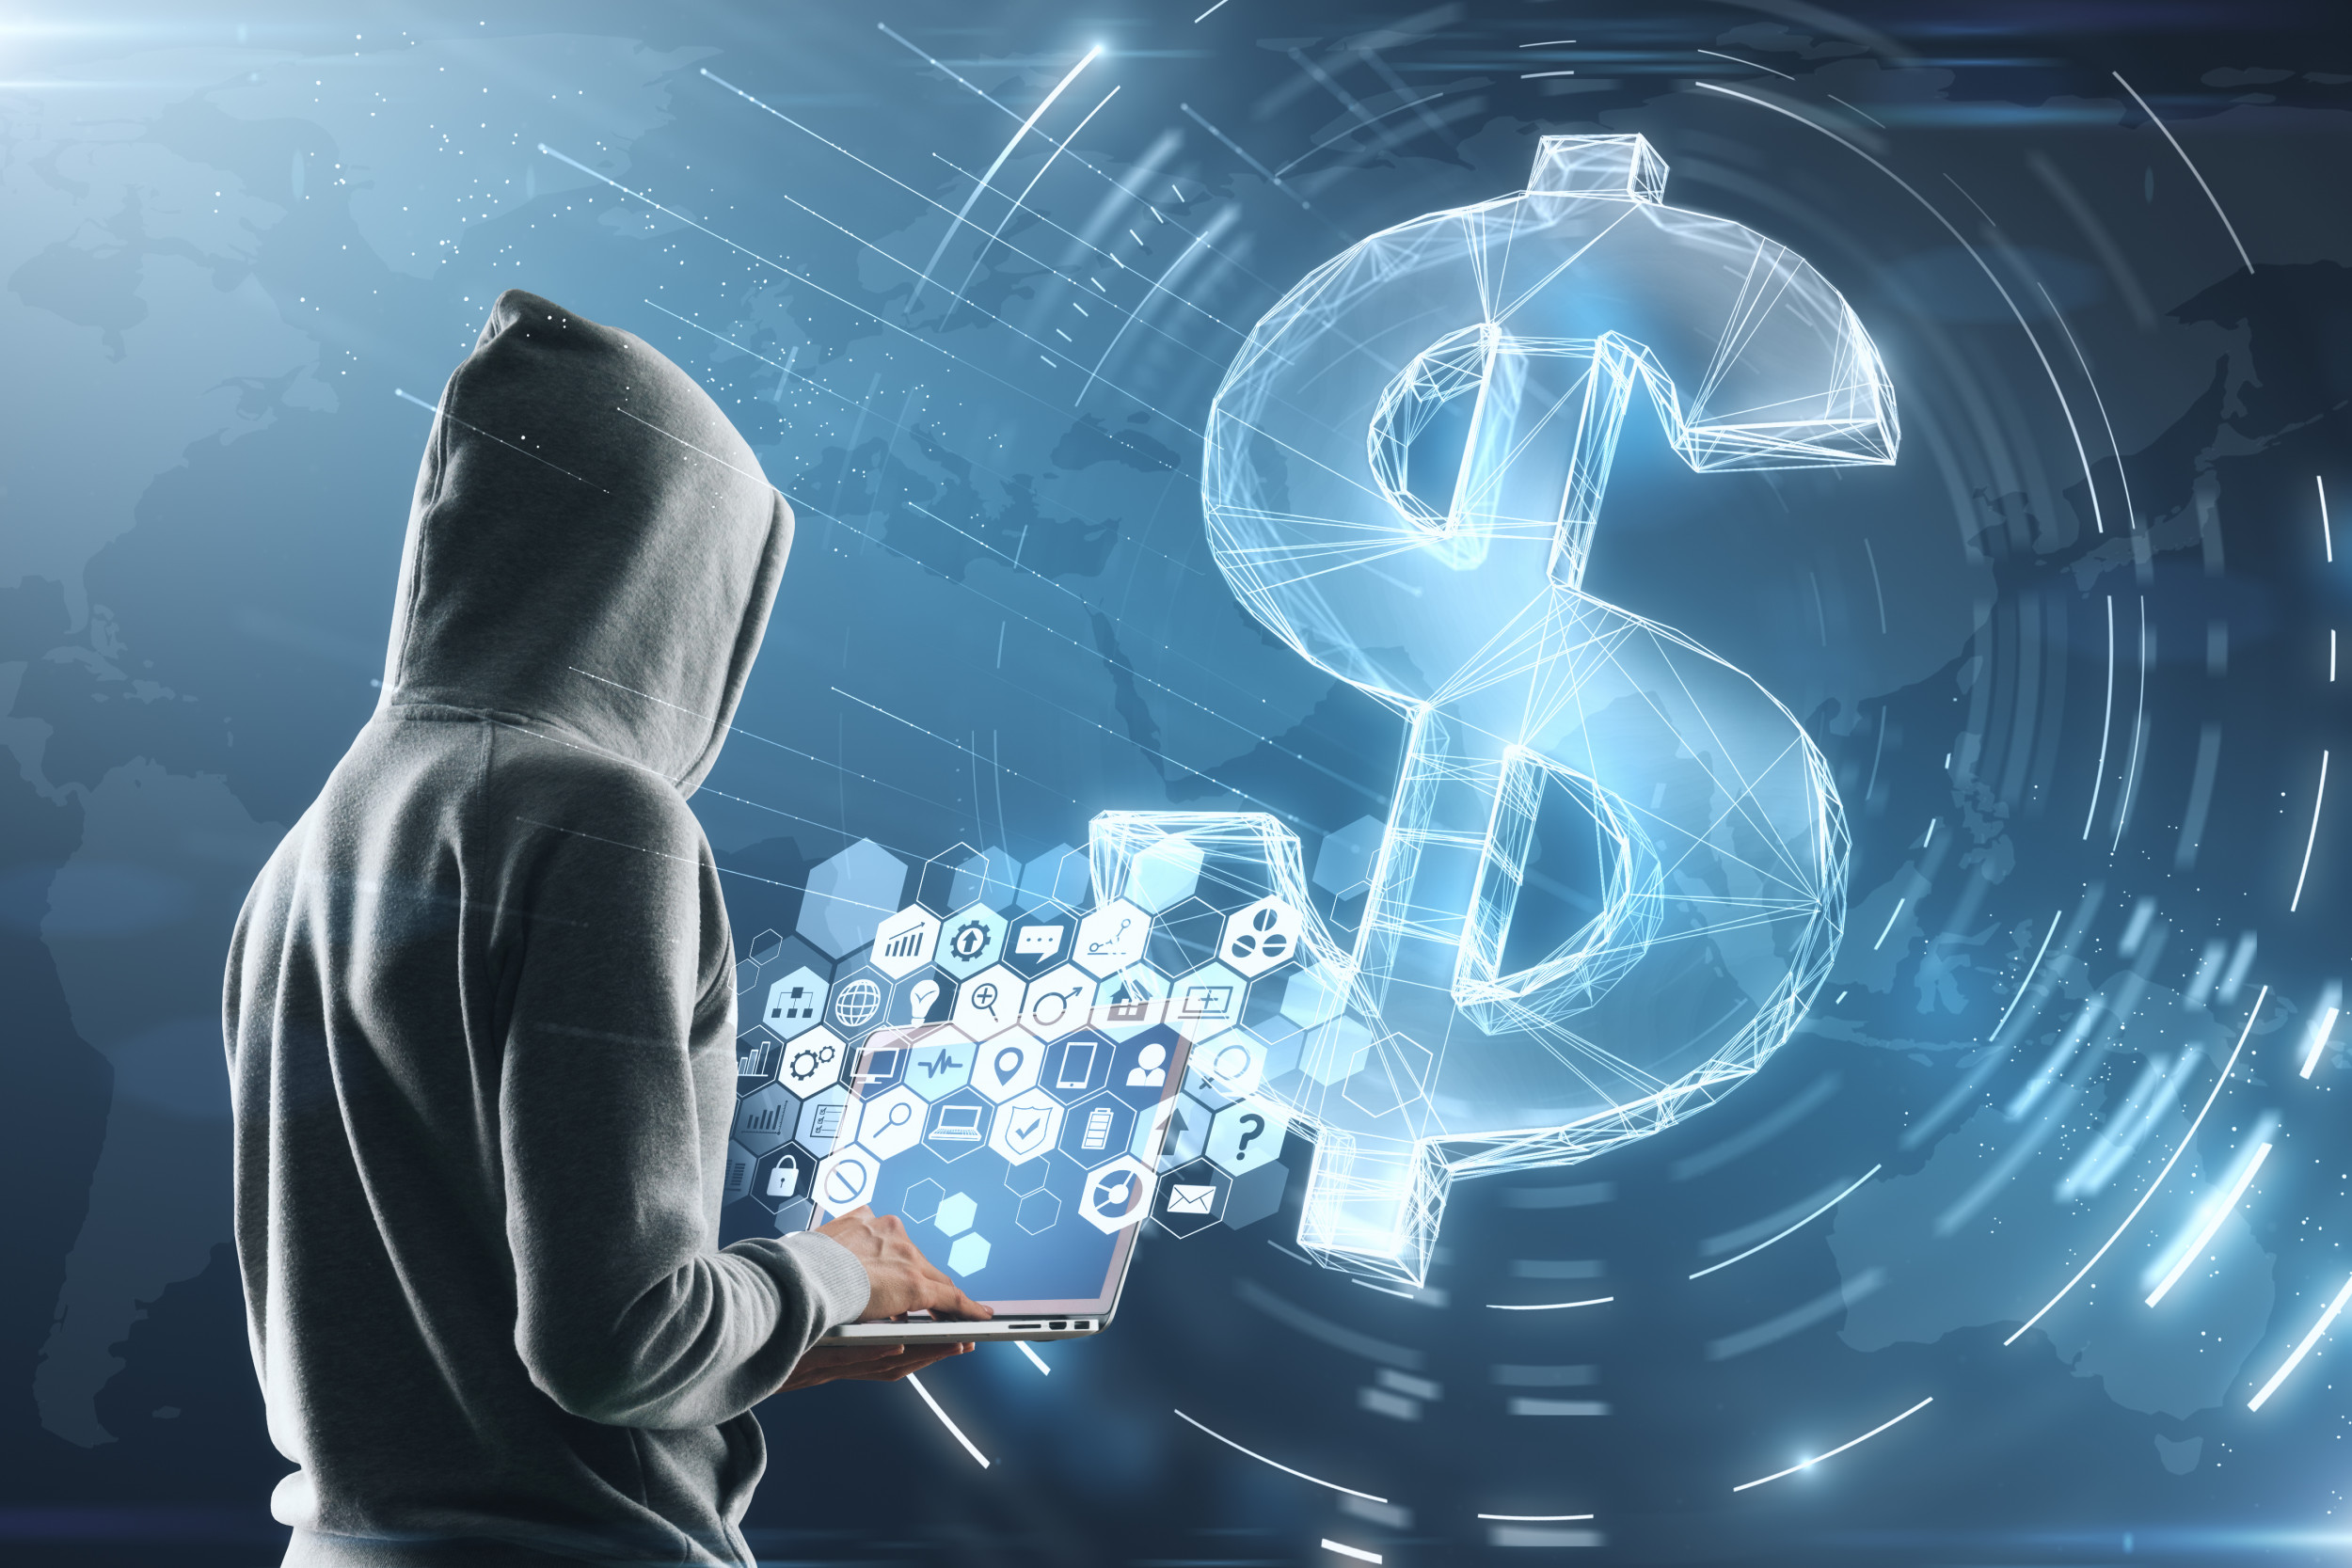 Biggest Crypto Heist: Hackers stole more than $600M From Poly Network